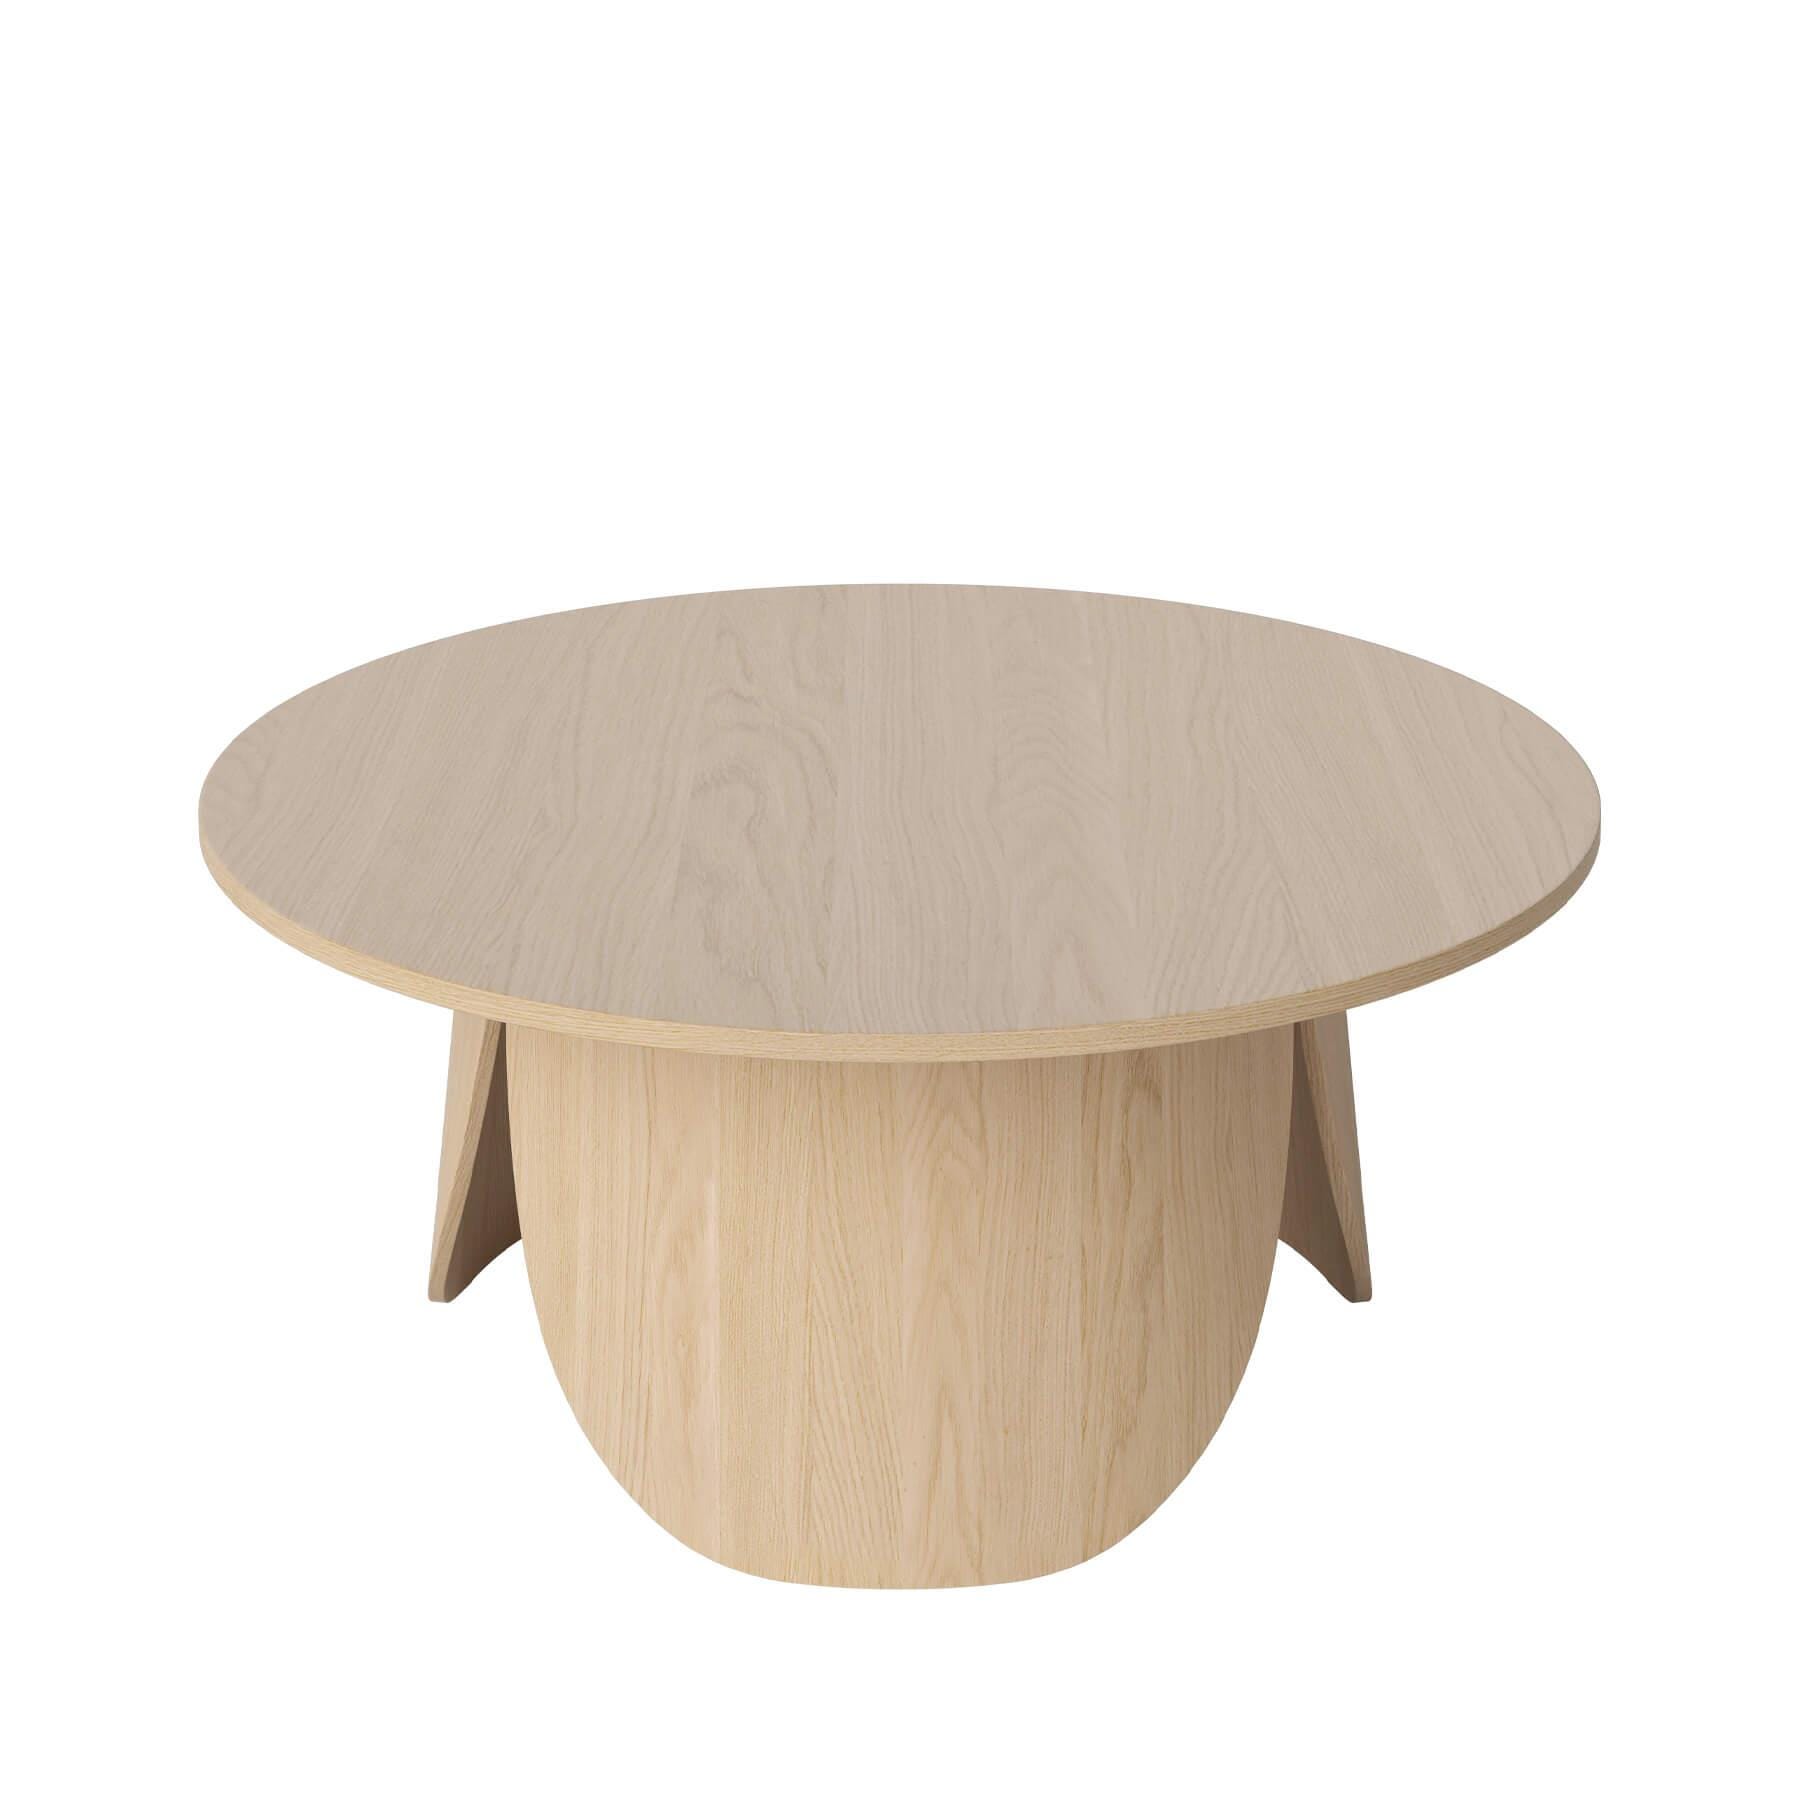 Bolia Peyote Coffee Table Large Low White Lacquered Oak Light Wood Designer Furniture From Holloways Of Ludlow